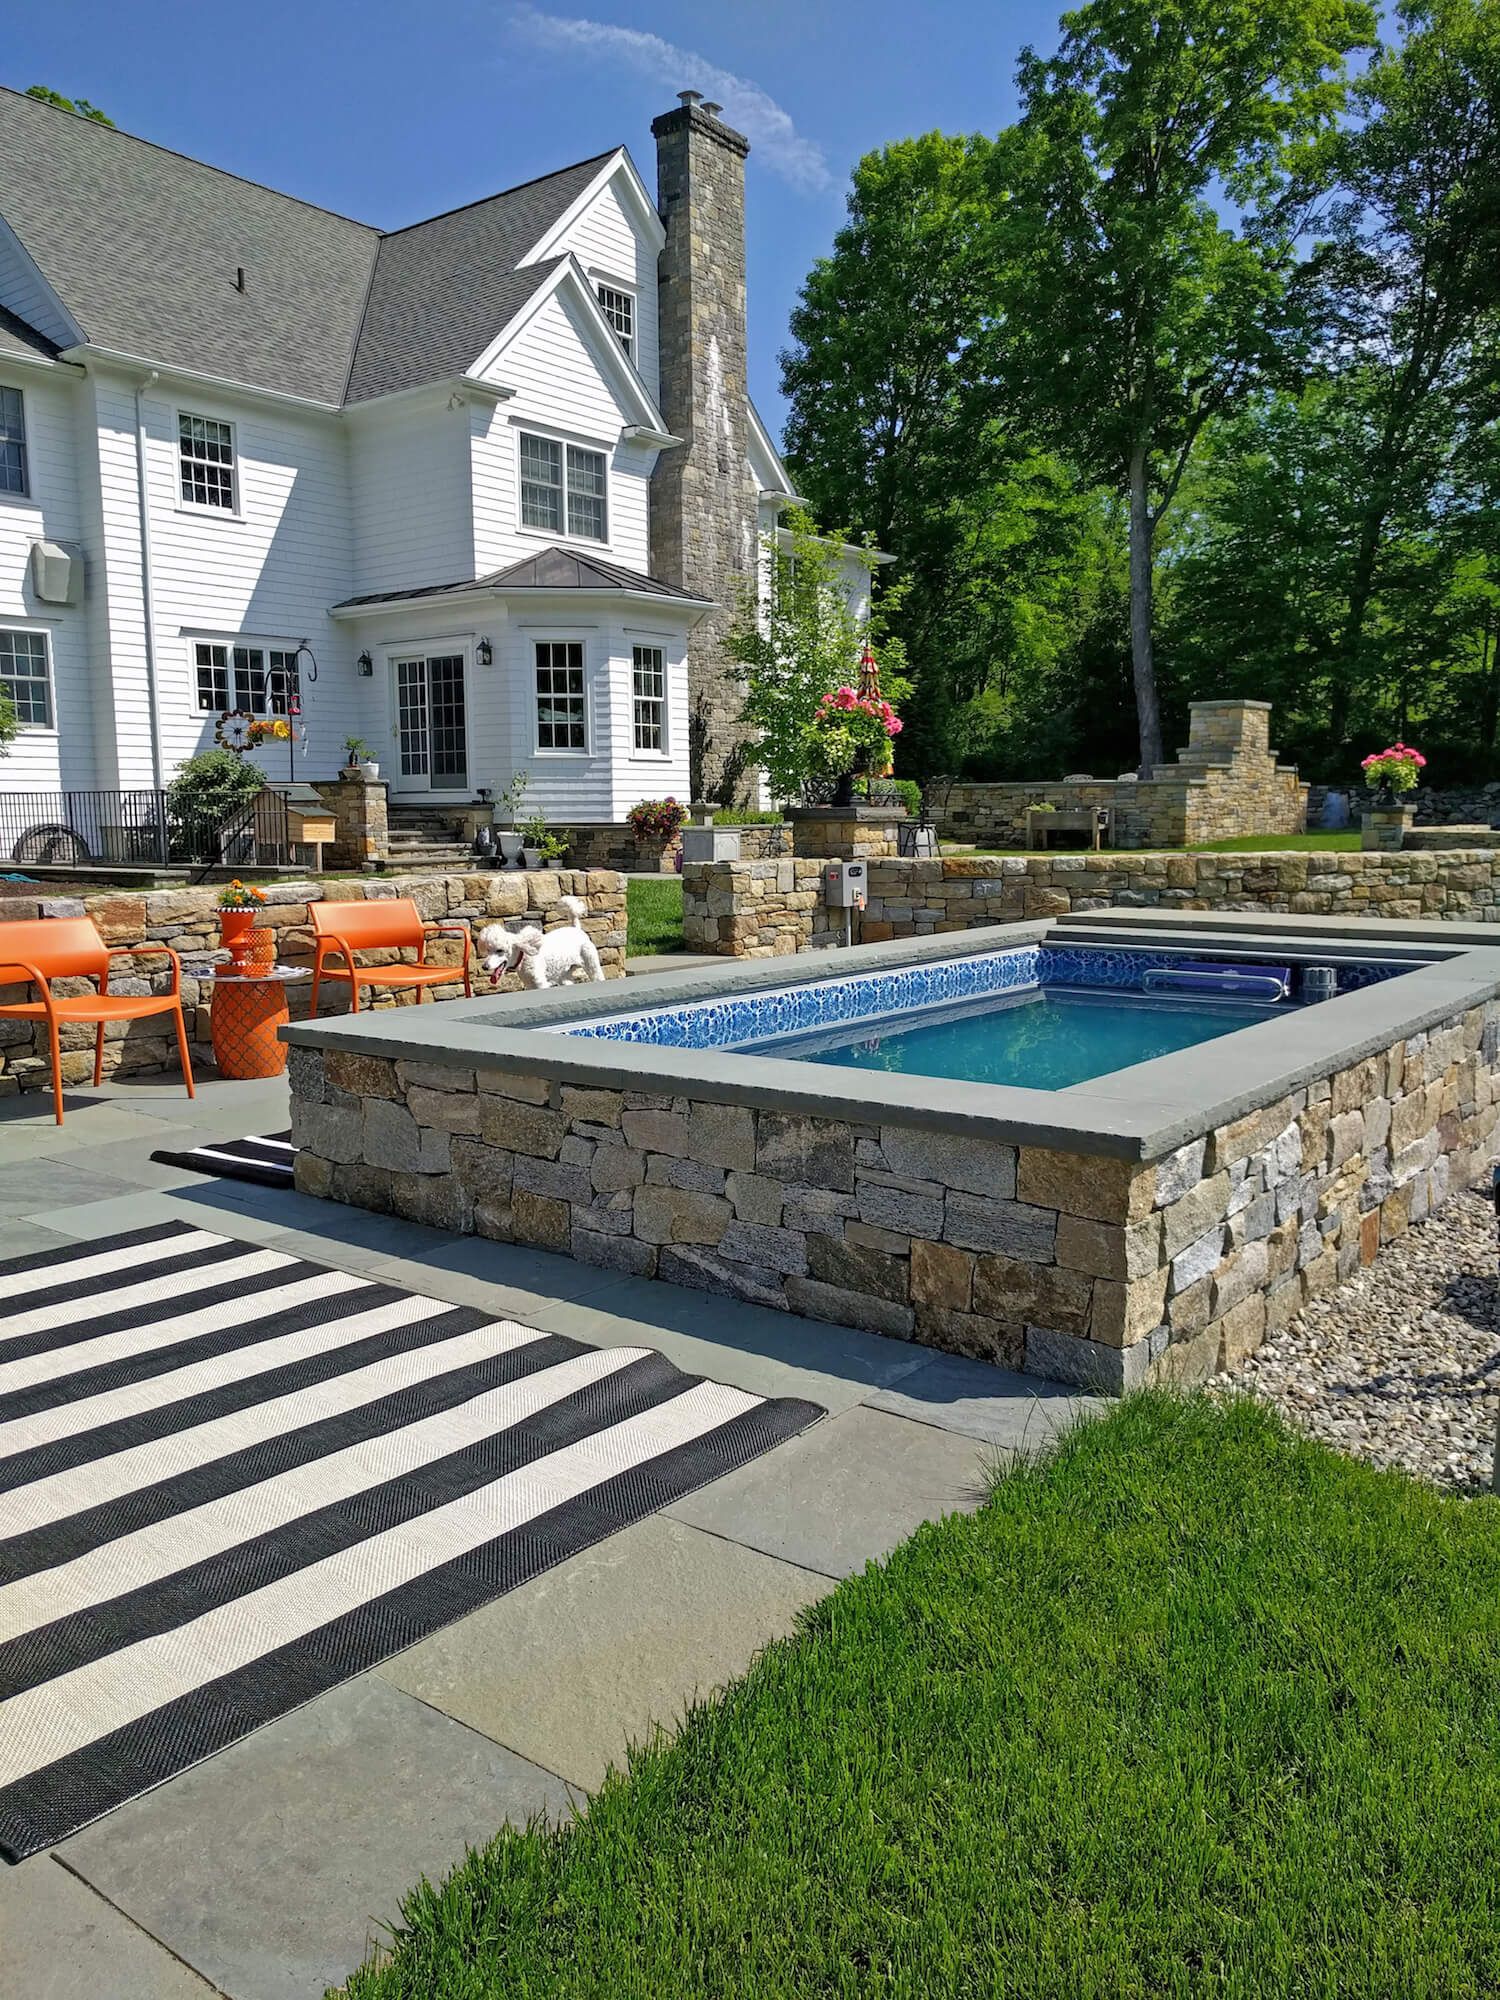 A picture of a beautiful patio pool setup, complete with plants and outdoor seating.